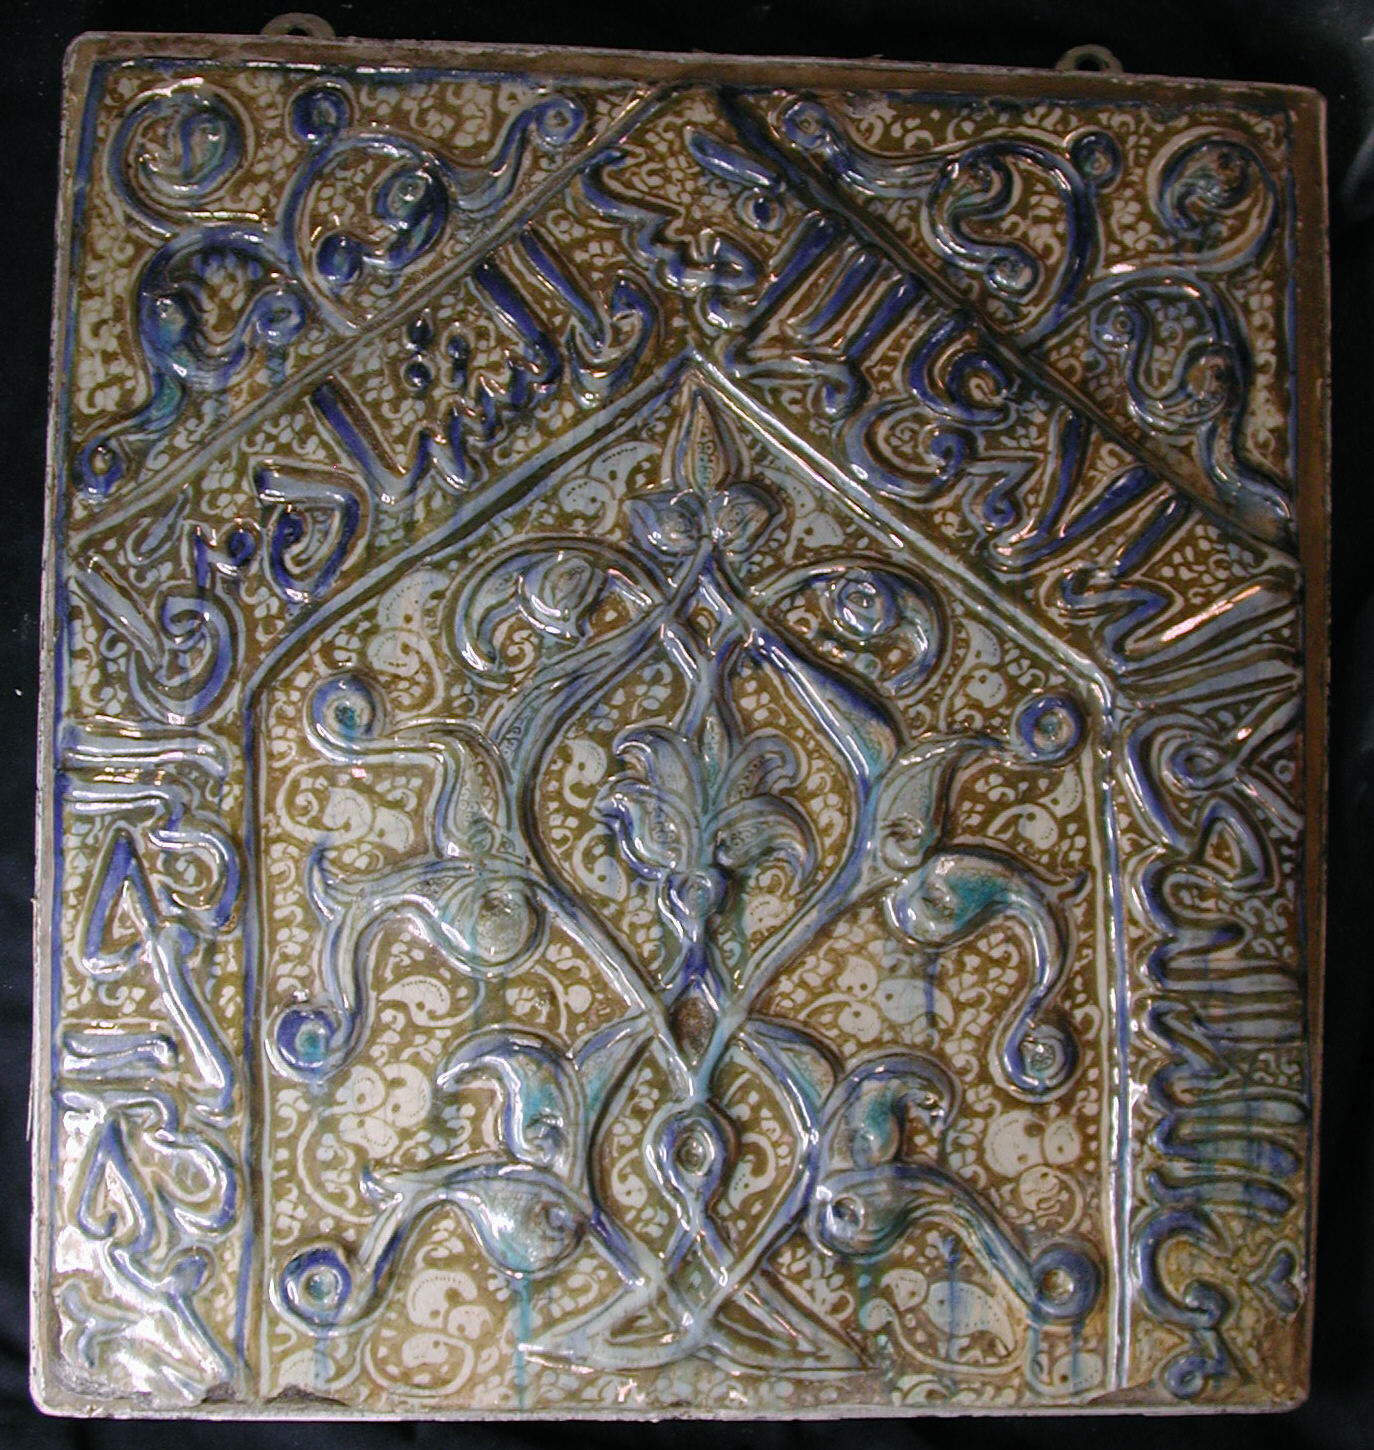 Tile with Niche Design and Inscription | The Metropolitan Museum of Art